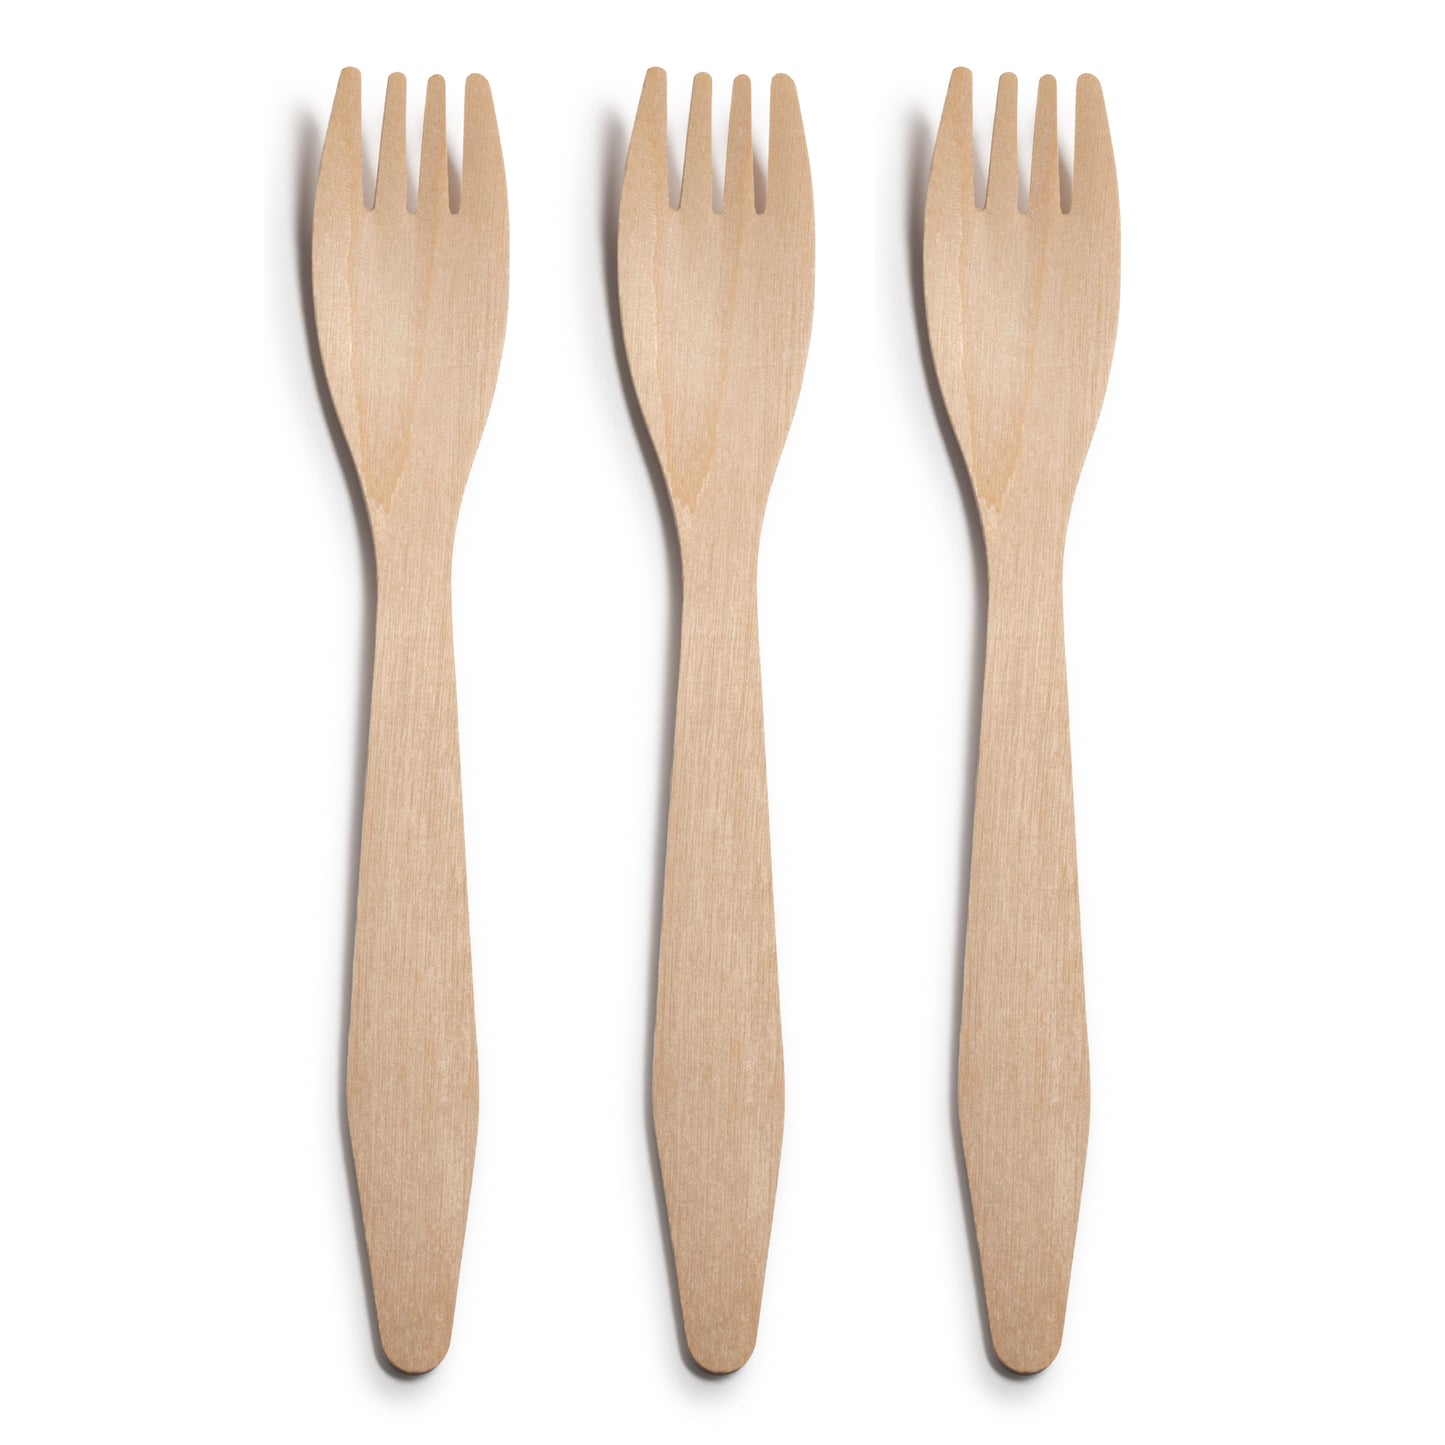 6.5" Natural Birch Disposable Eco-Friendly Dinner Forks